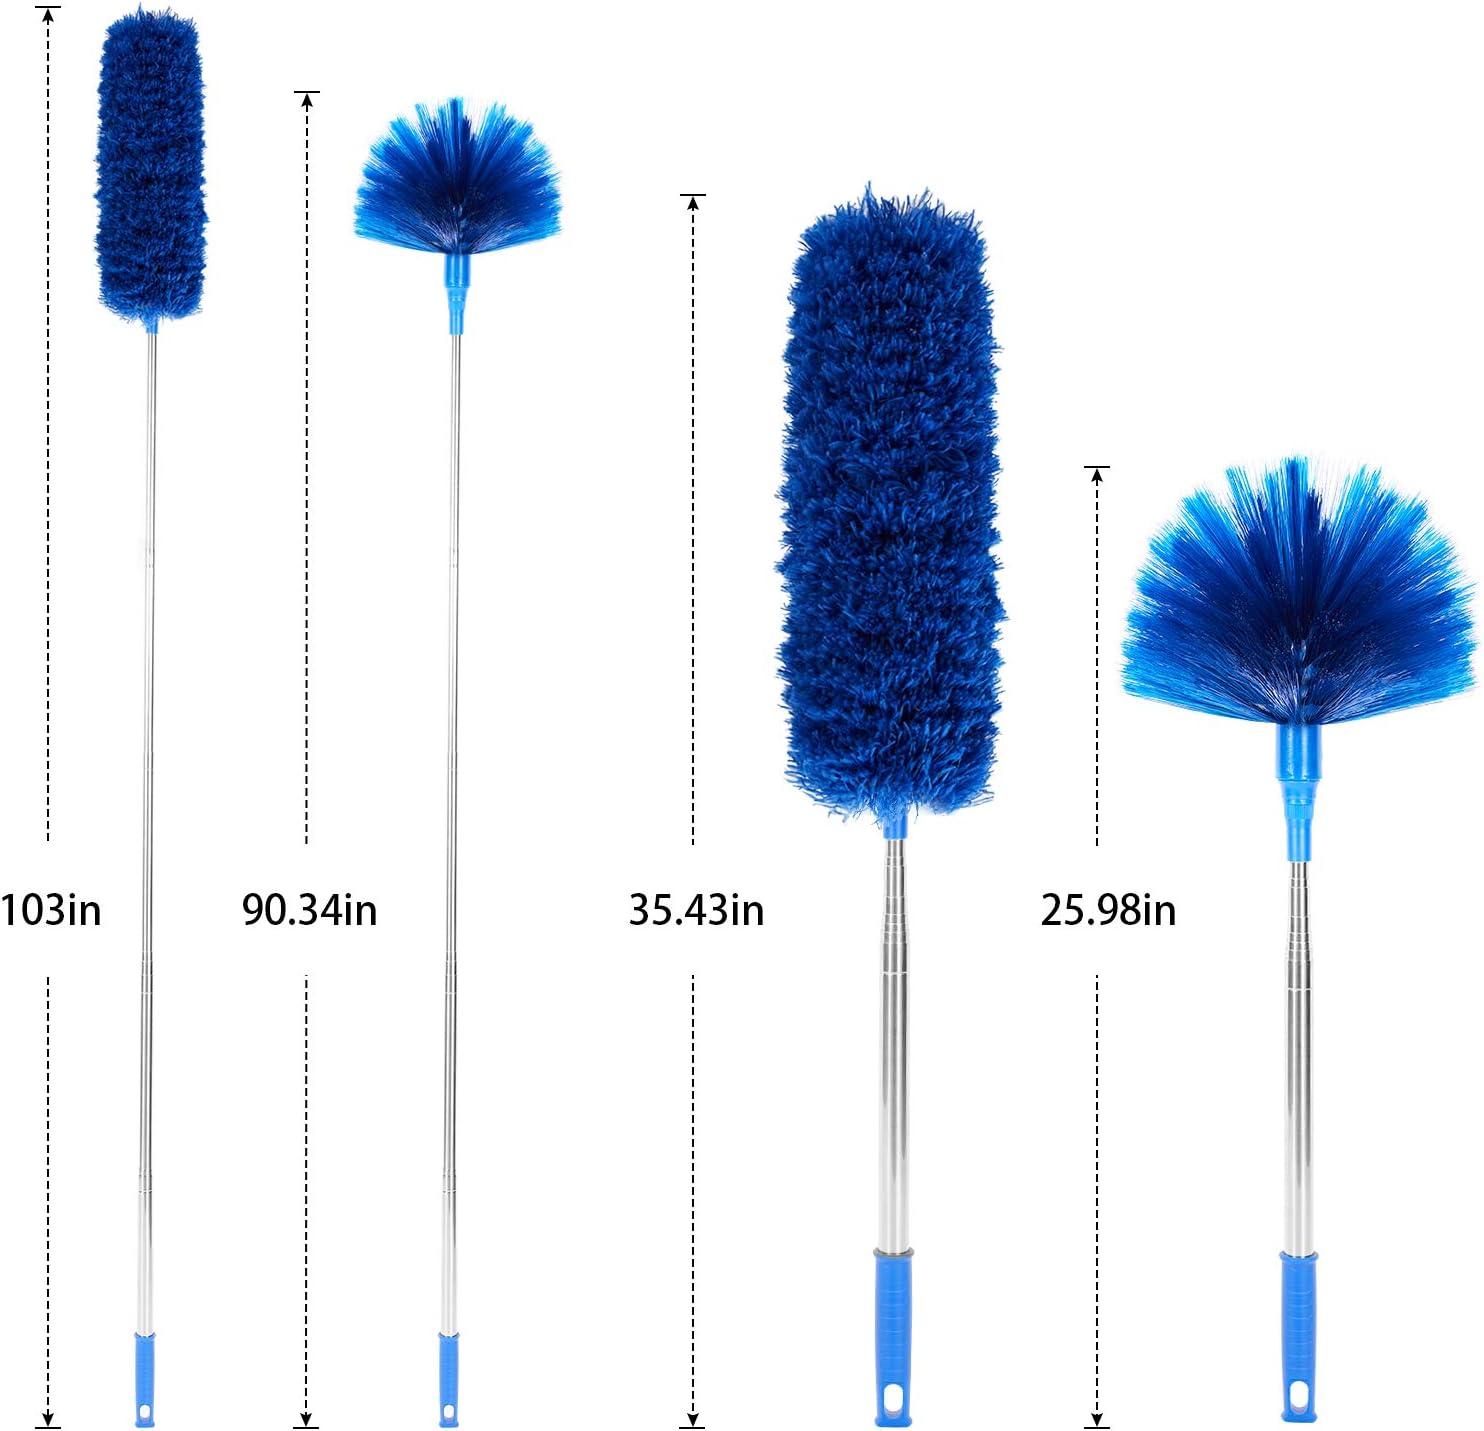 Ceiling Fan Duster with Extension Pole, Cobweb & Corner Brush Cleaning Kit  w 2 Duster Heads for Cleaning,15- 100 Inch Long Handle Aluminum Telescoping  Pole, Washable(Blue)